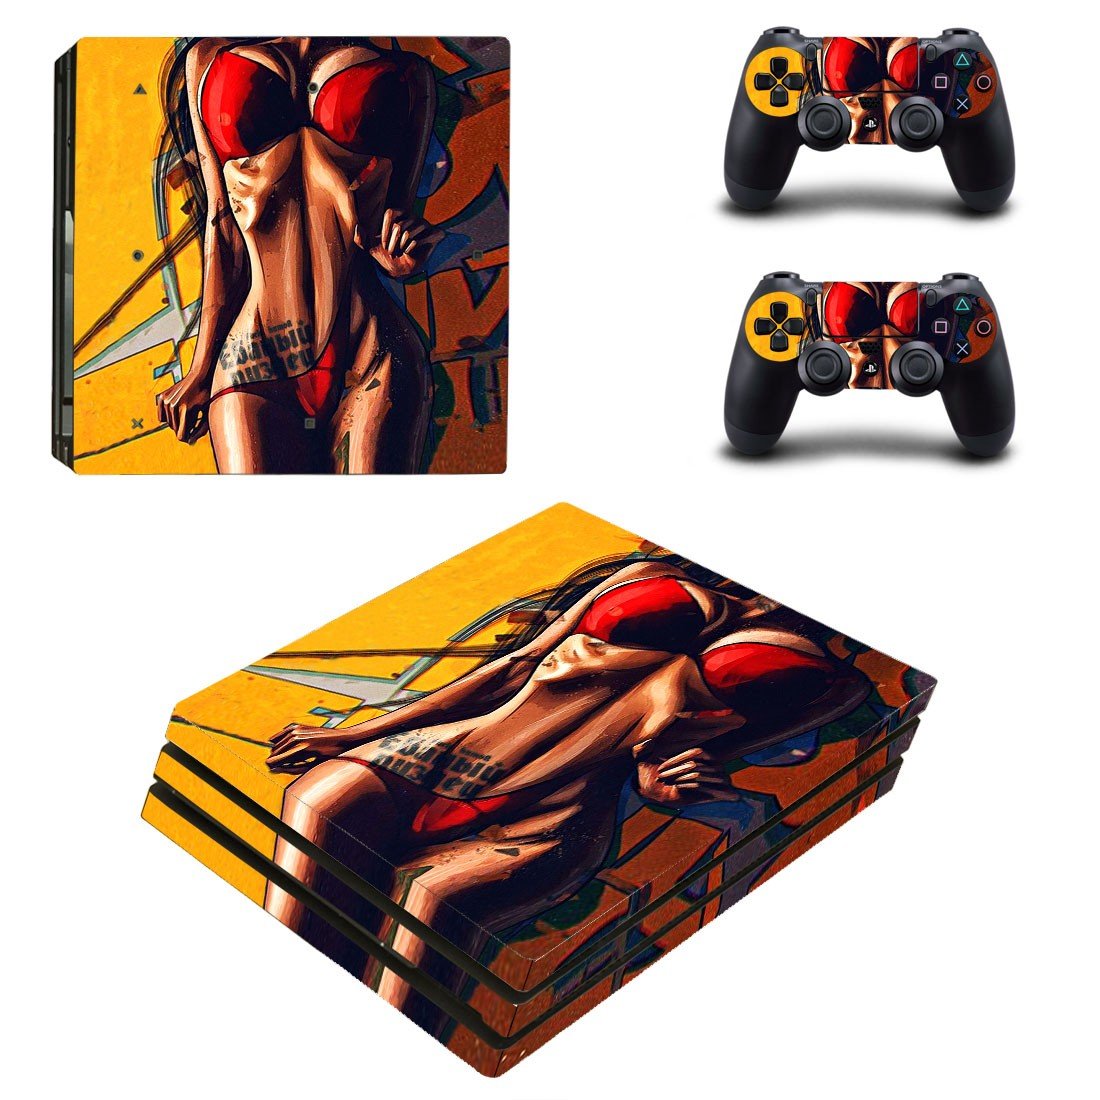 Sexy Lady Decal Skin Sticker For Ps4 Pro Console And Controllers 